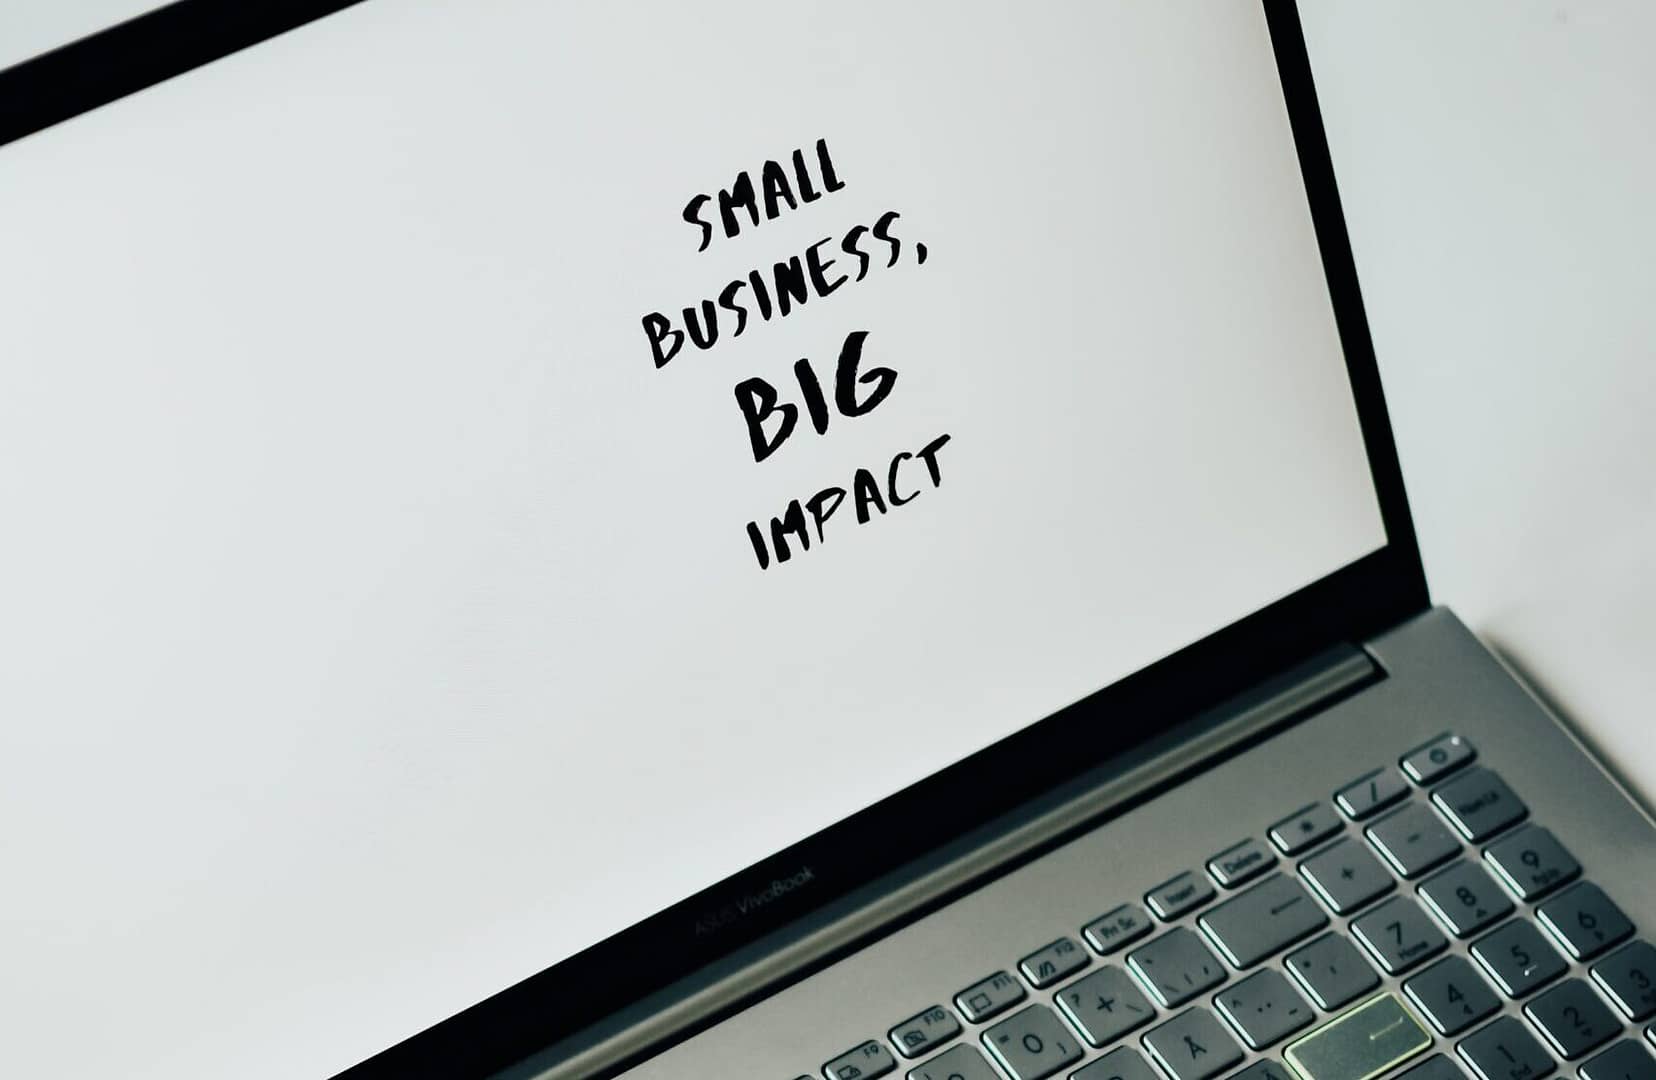 What are the impacts of digital marketing on small businesses?